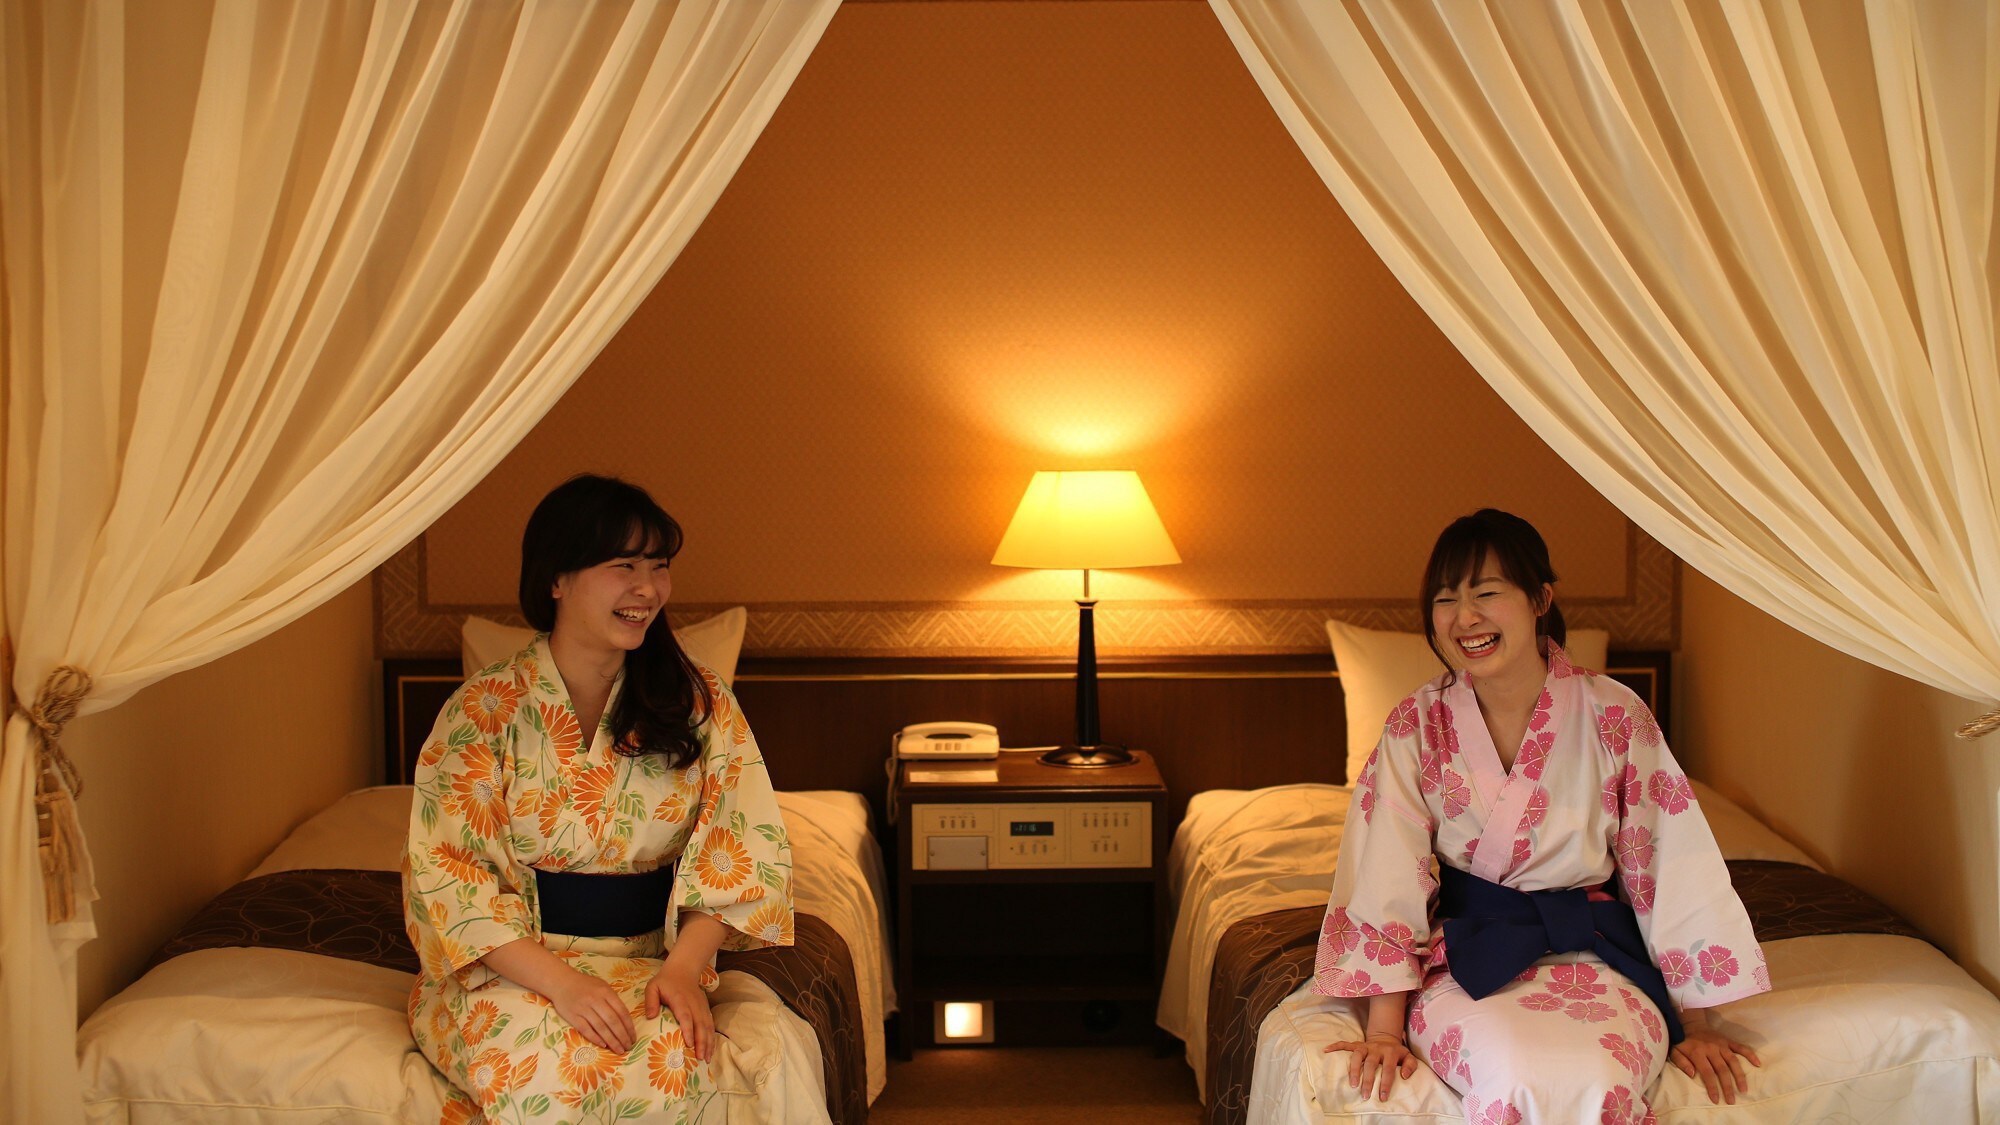 The bed with canopy curtain is cute ♪ Top floor semi-suite room